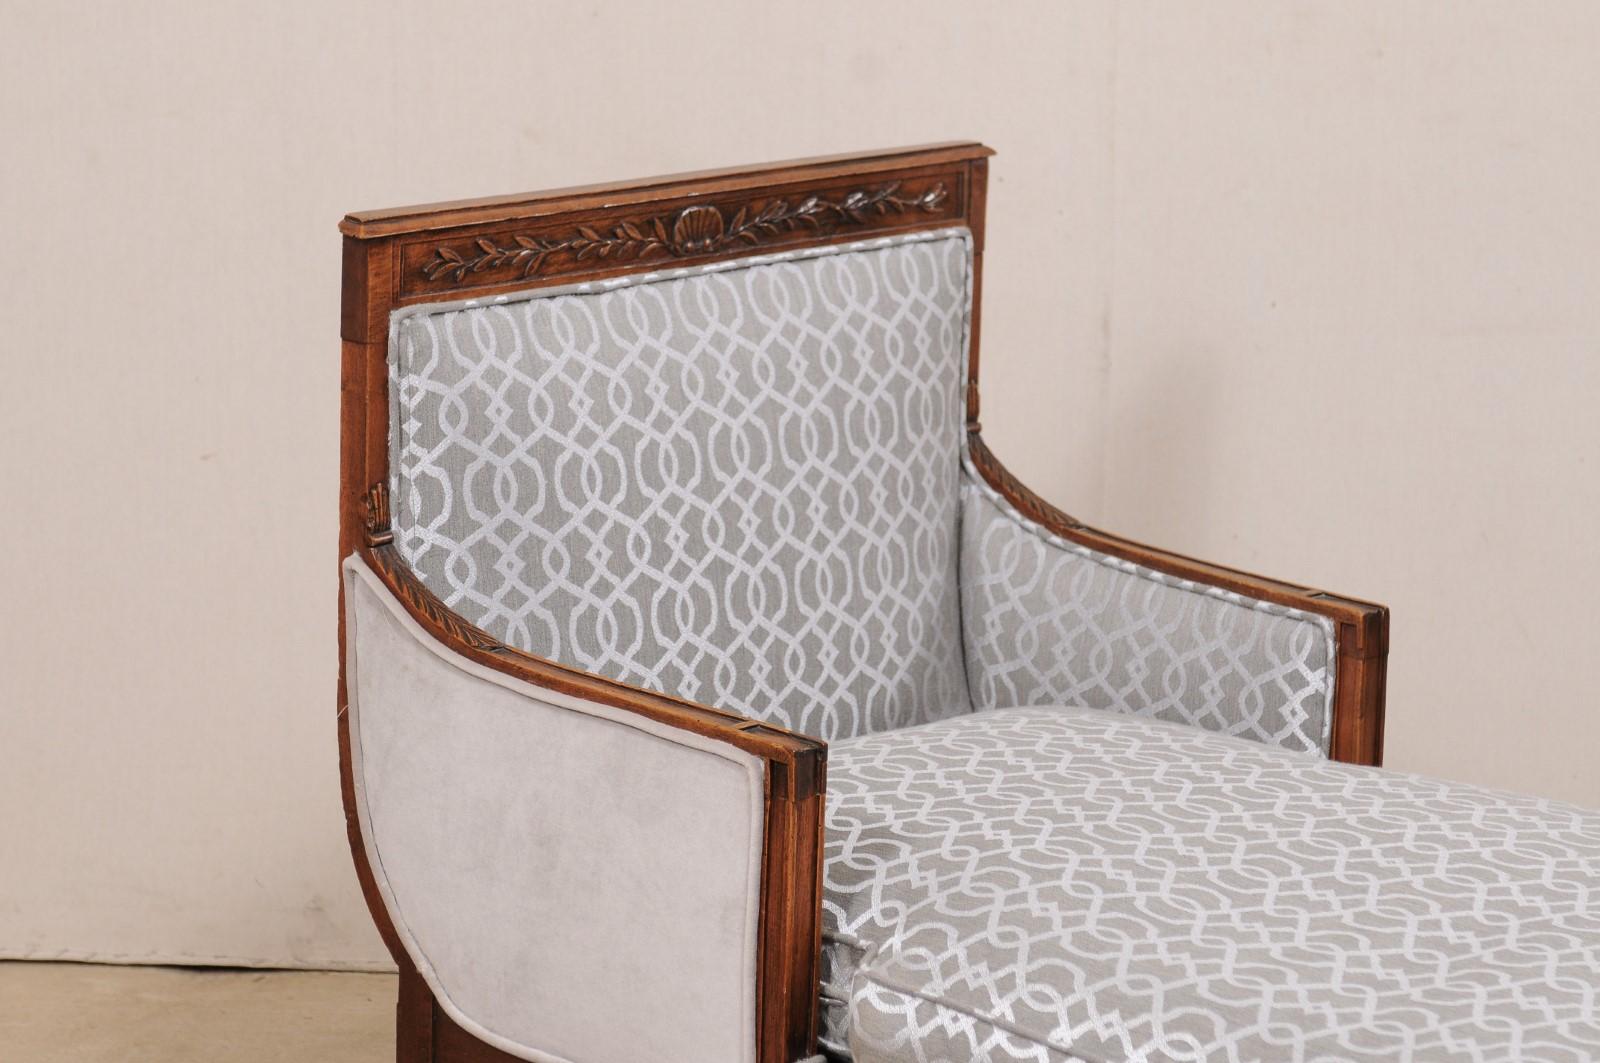 Upholstery An Elegant French Duchesse en Bateau (Chaise) Newly Upholstered, 19th Century For Sale